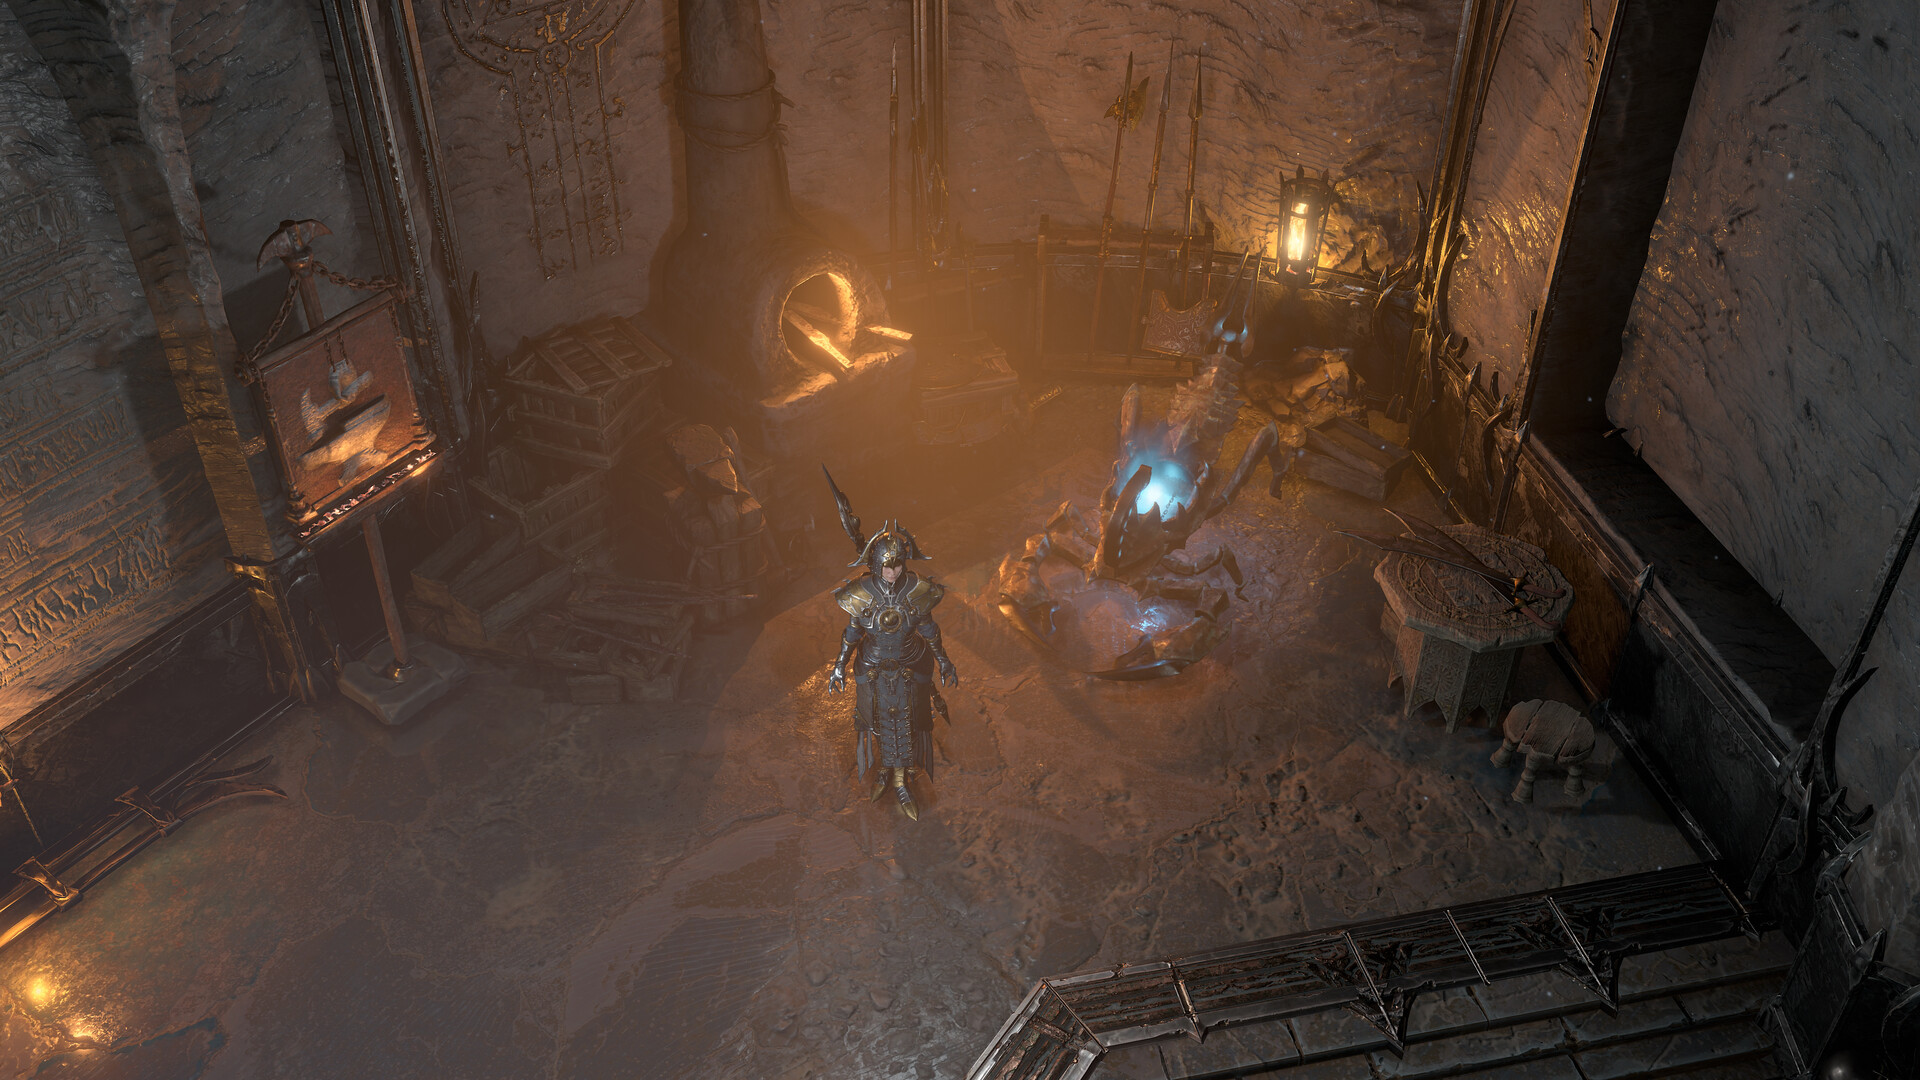 A Diablo 4 player character standing in an empty stone room dimly lit by candles